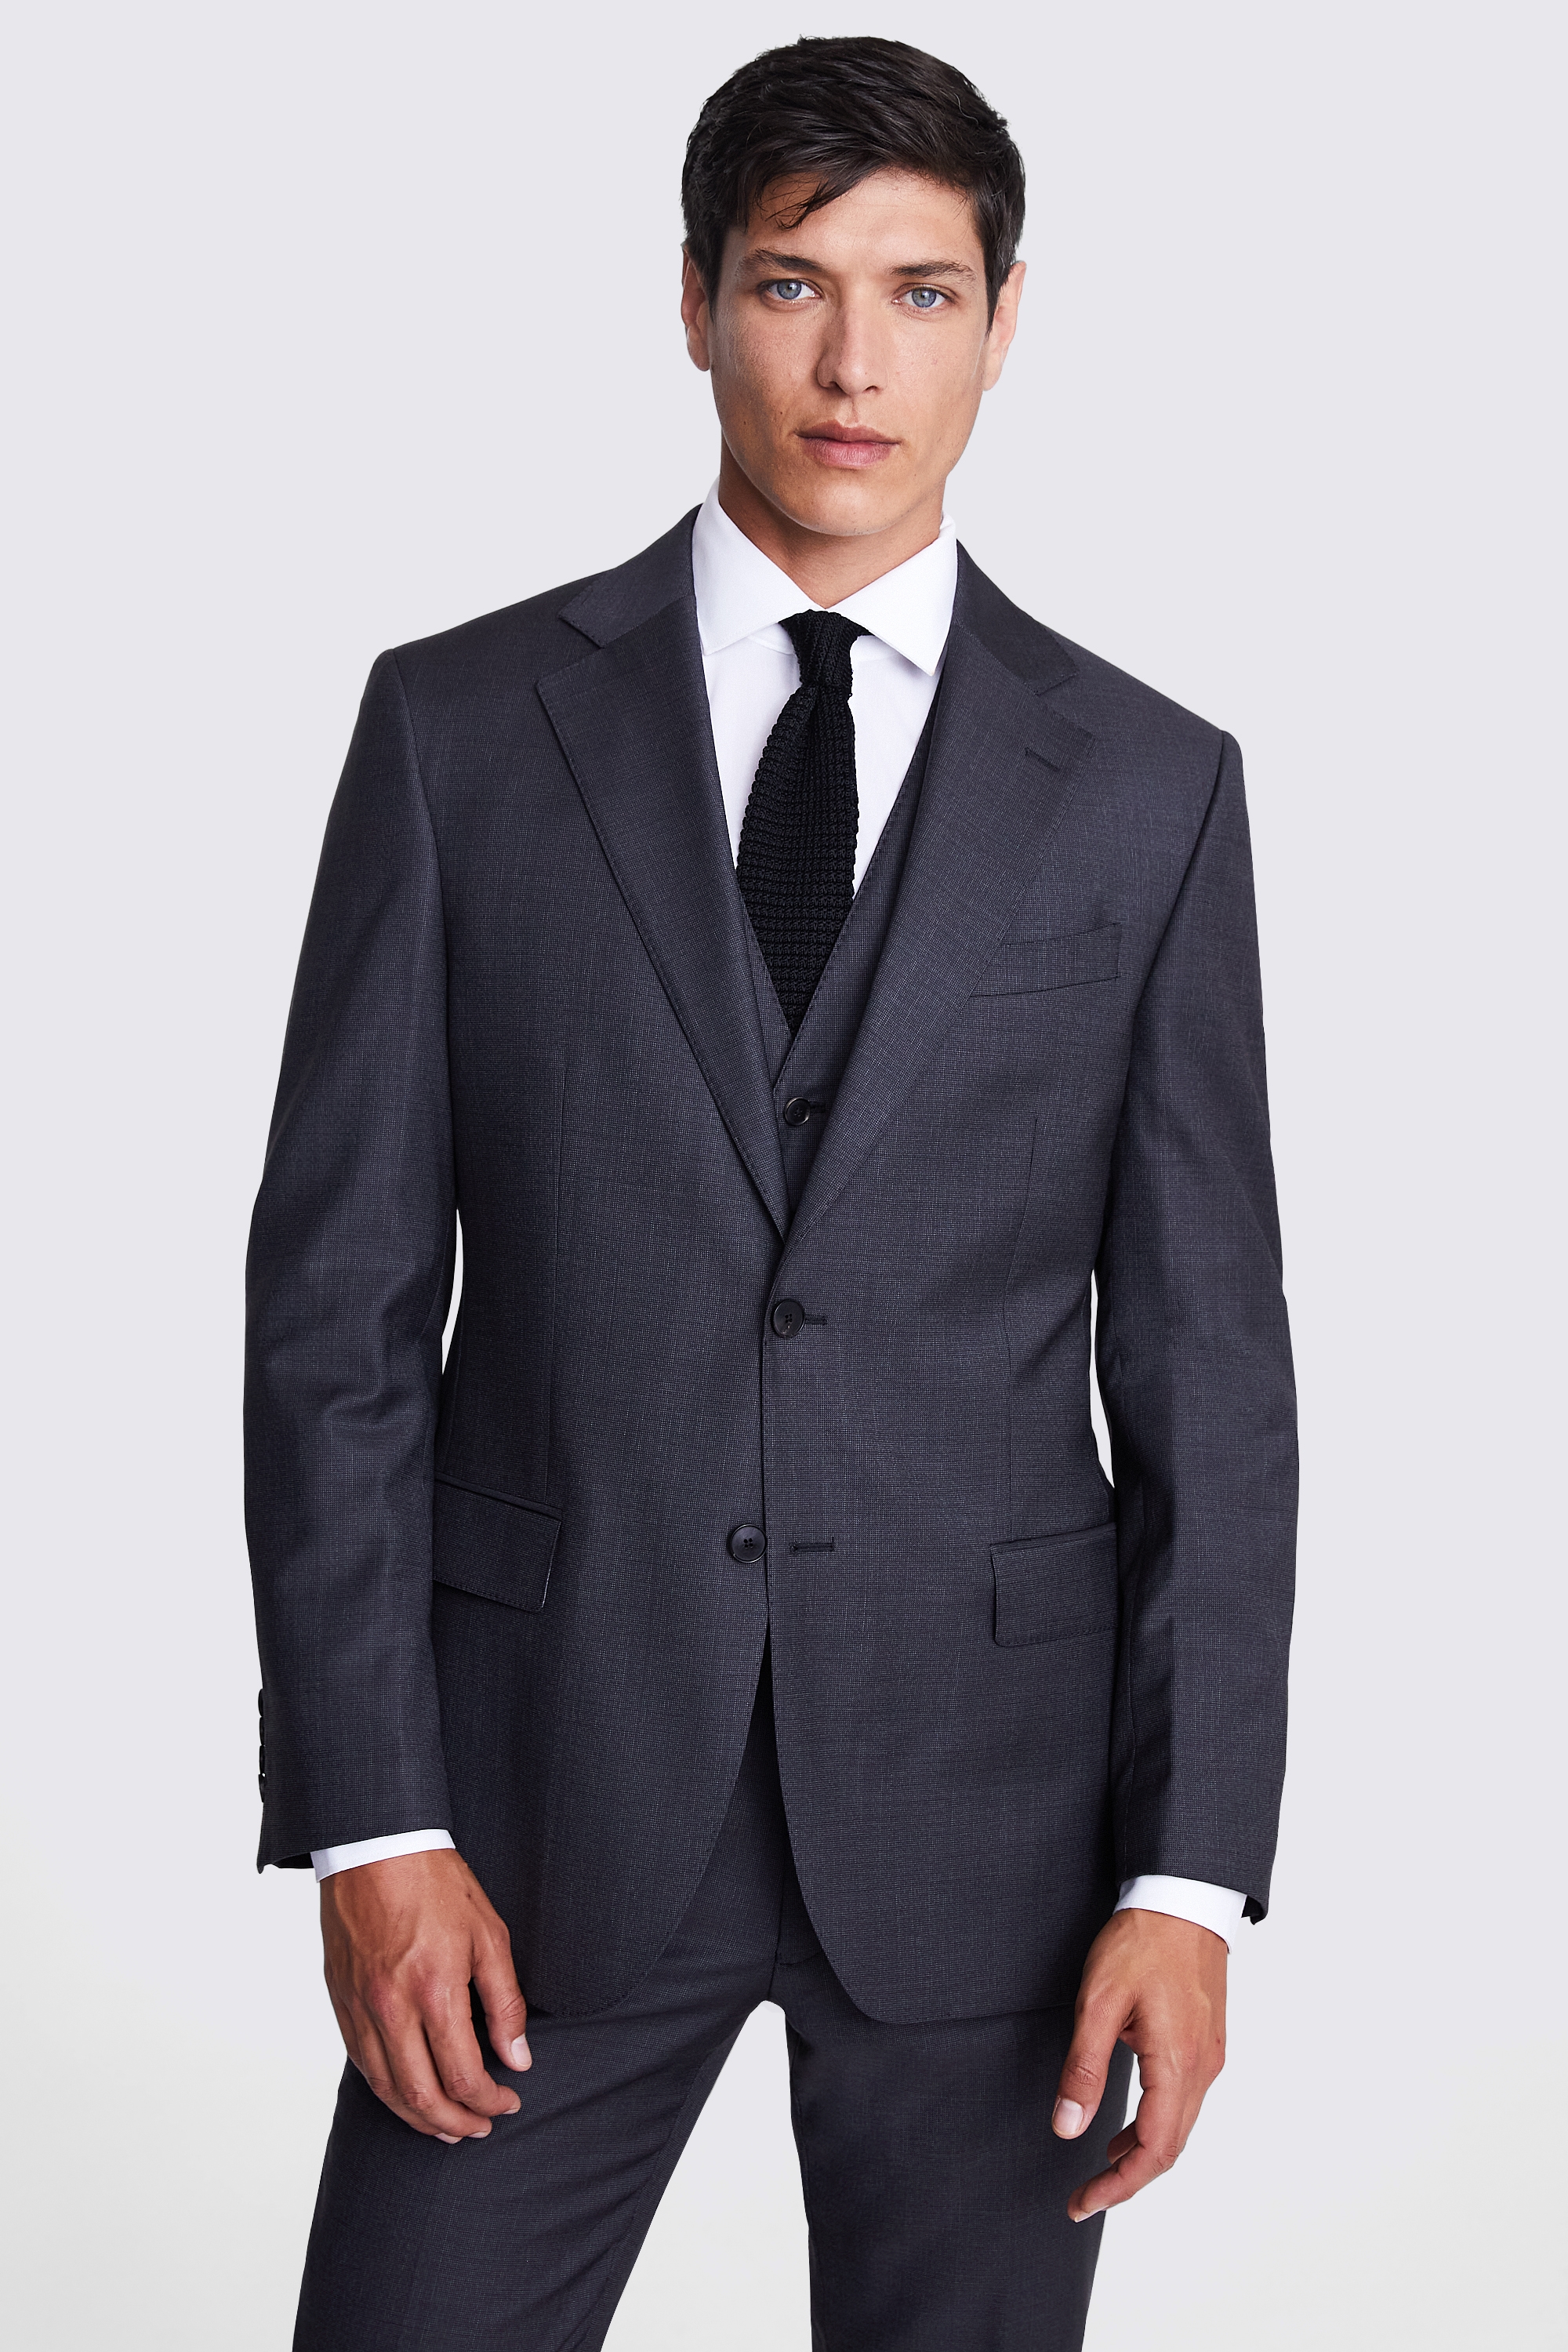 Italian Tailored Fit Charcoal Jacket | Buy Online at Moss